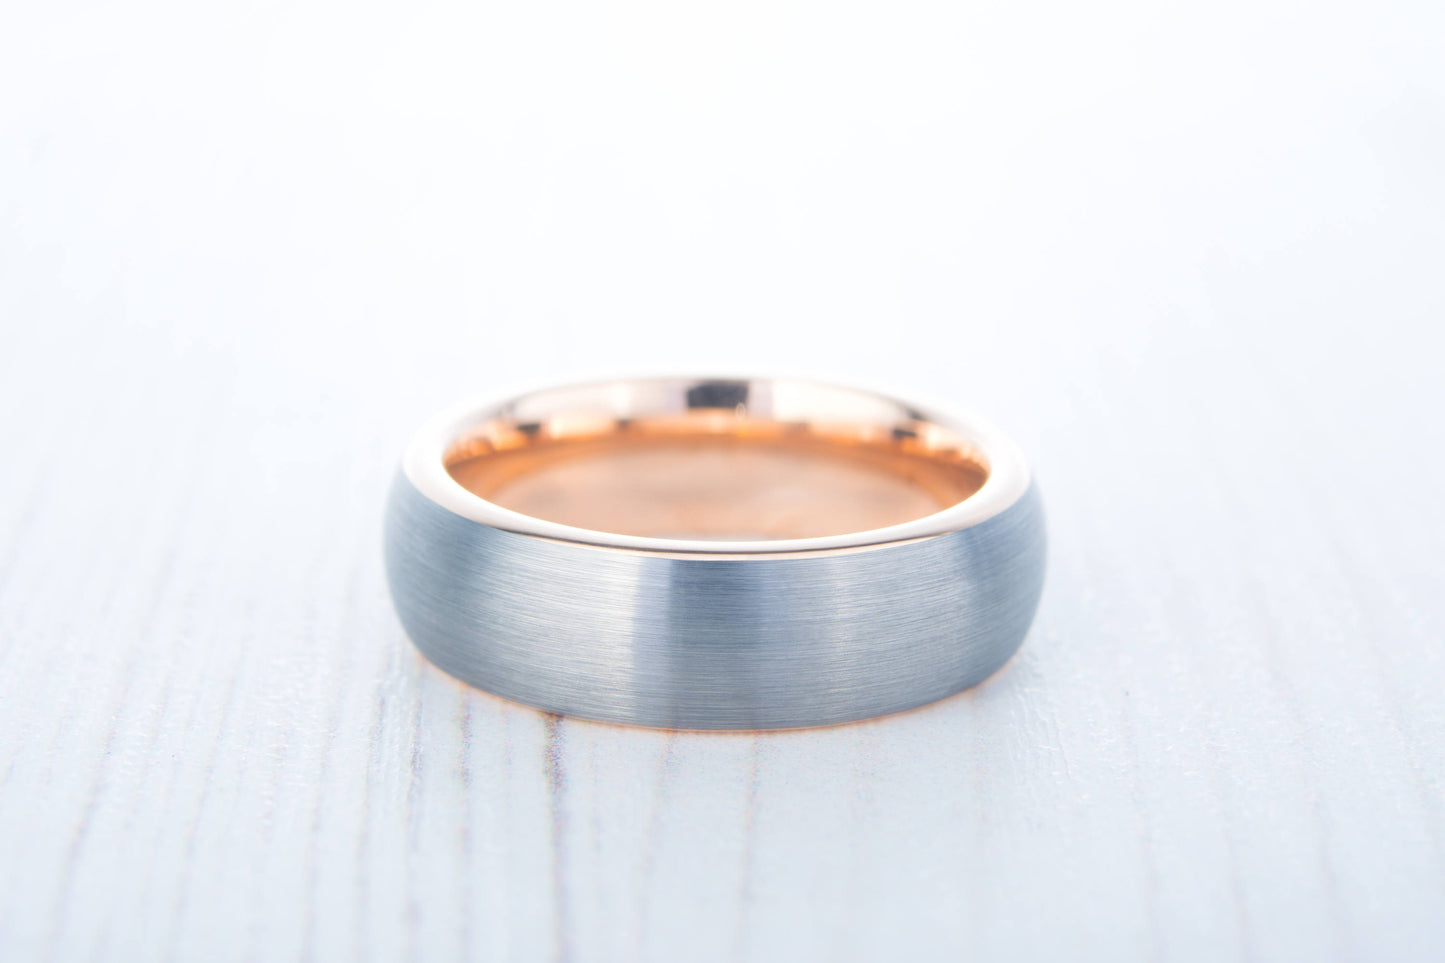 5mm 14K Rose Gold and Brushed Titanium Wedding ring band for men and women